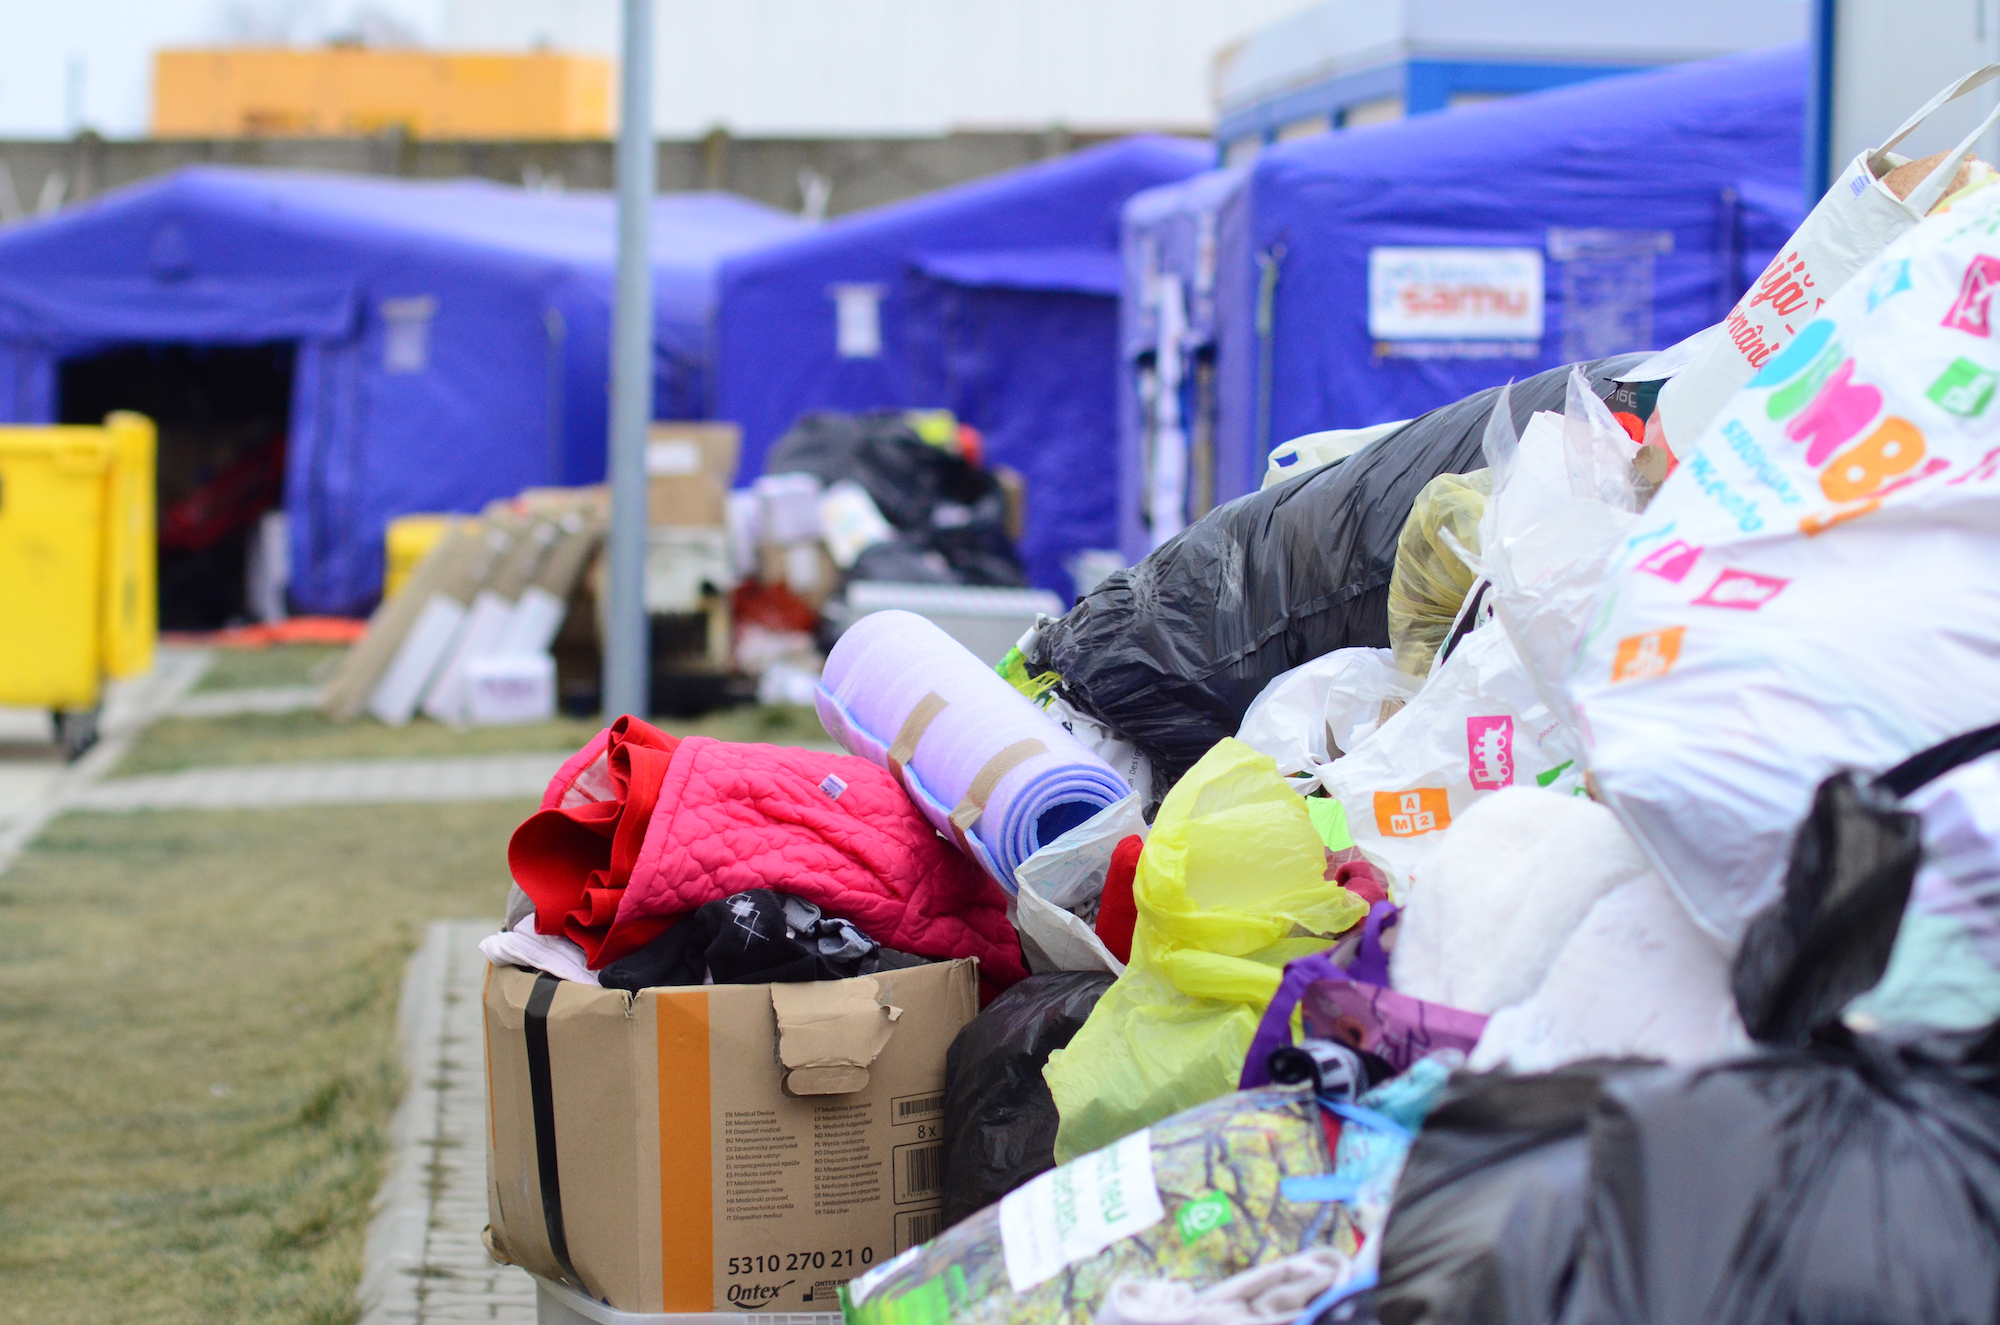 Donations from all over the continent pile up - some for refugees, some bound for Ukraine